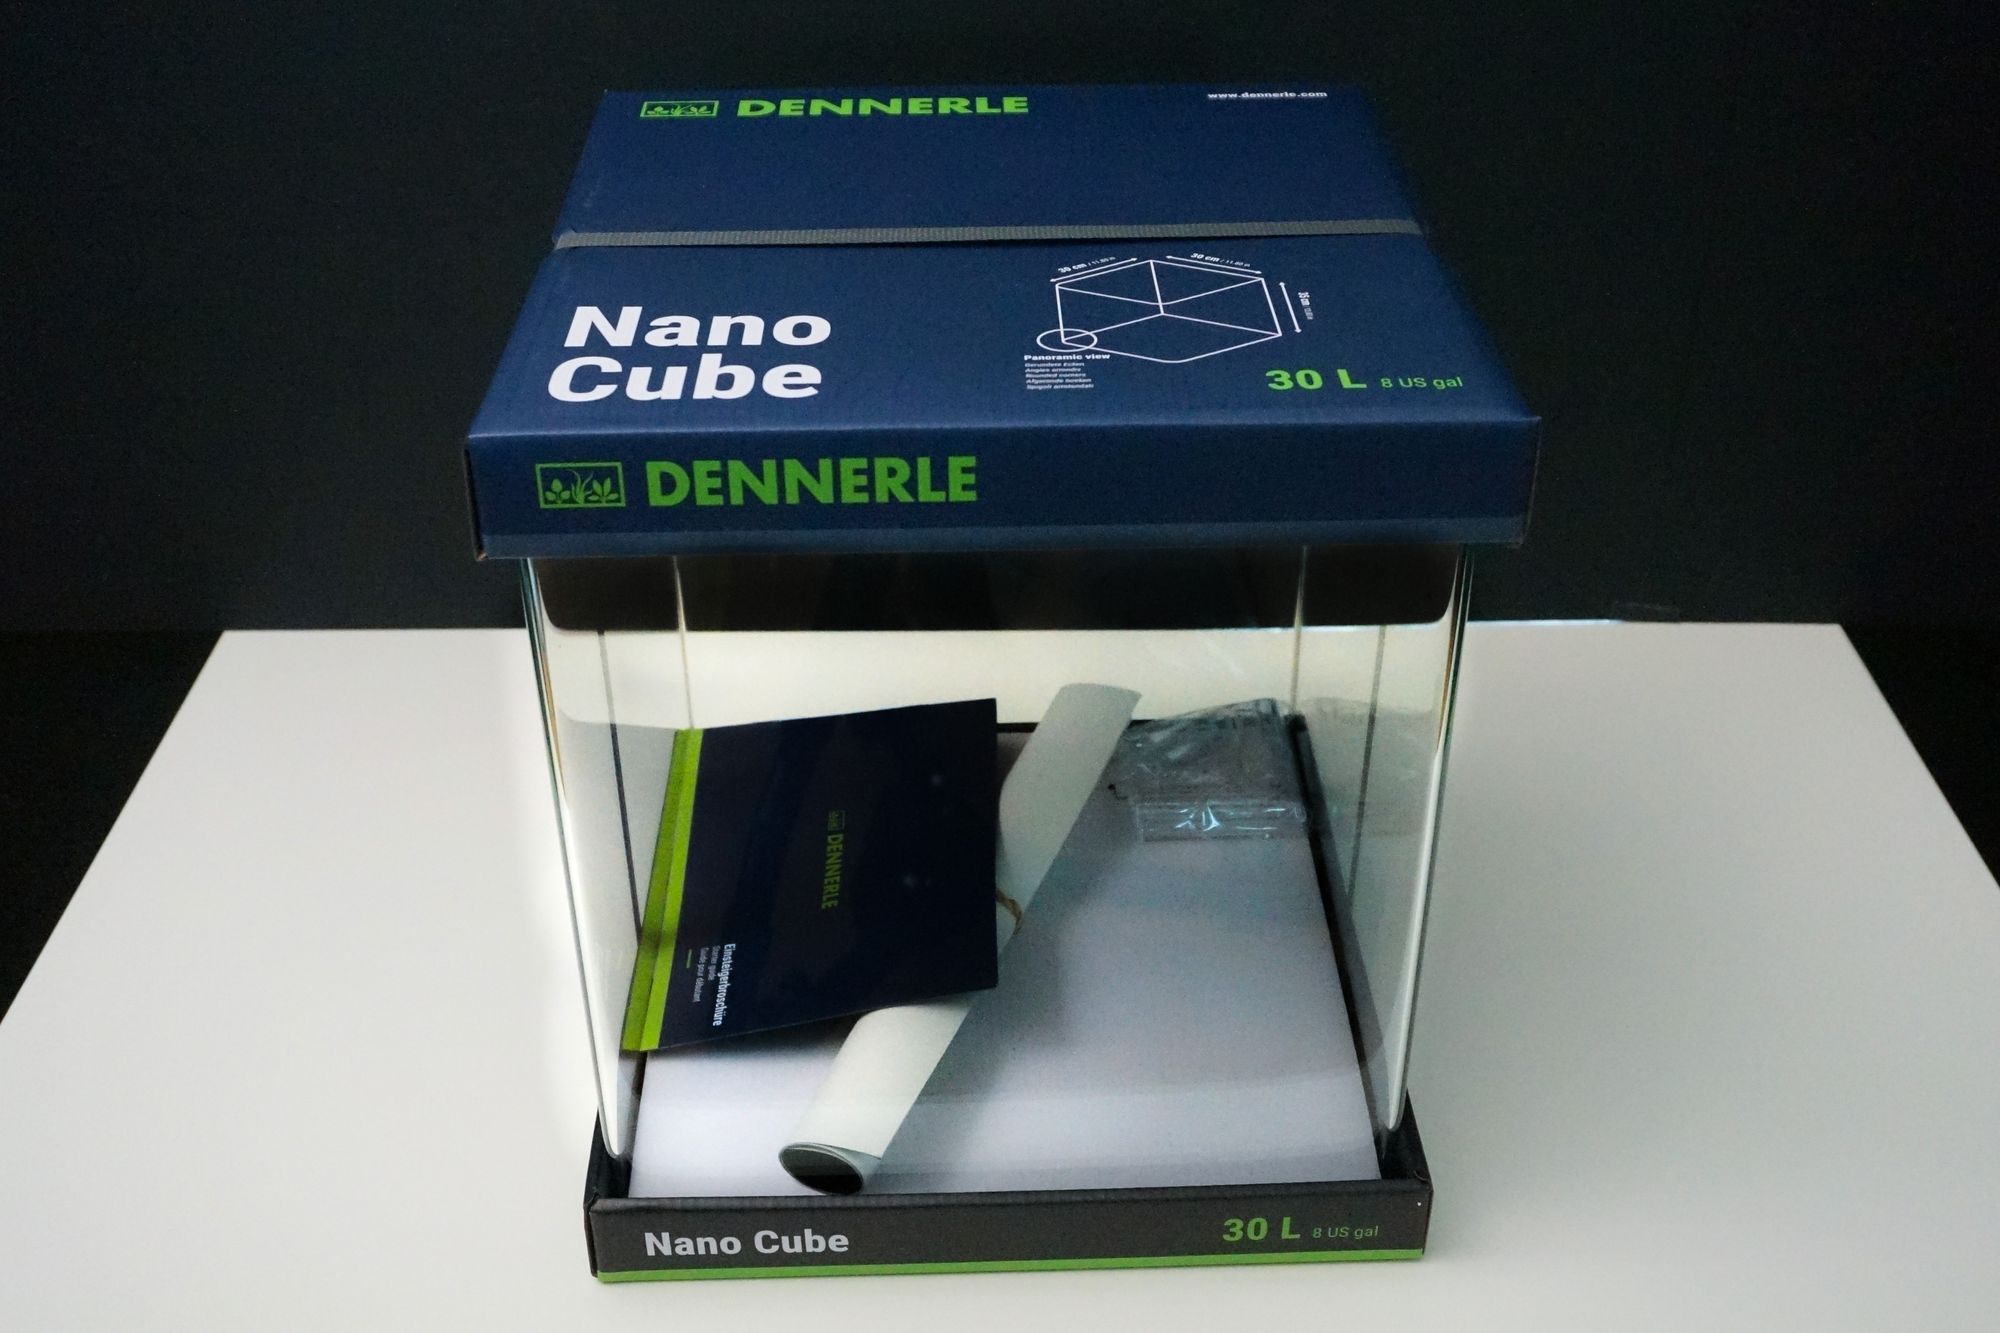 Nano Cube from Dennerle with 30 L / 8 Gal